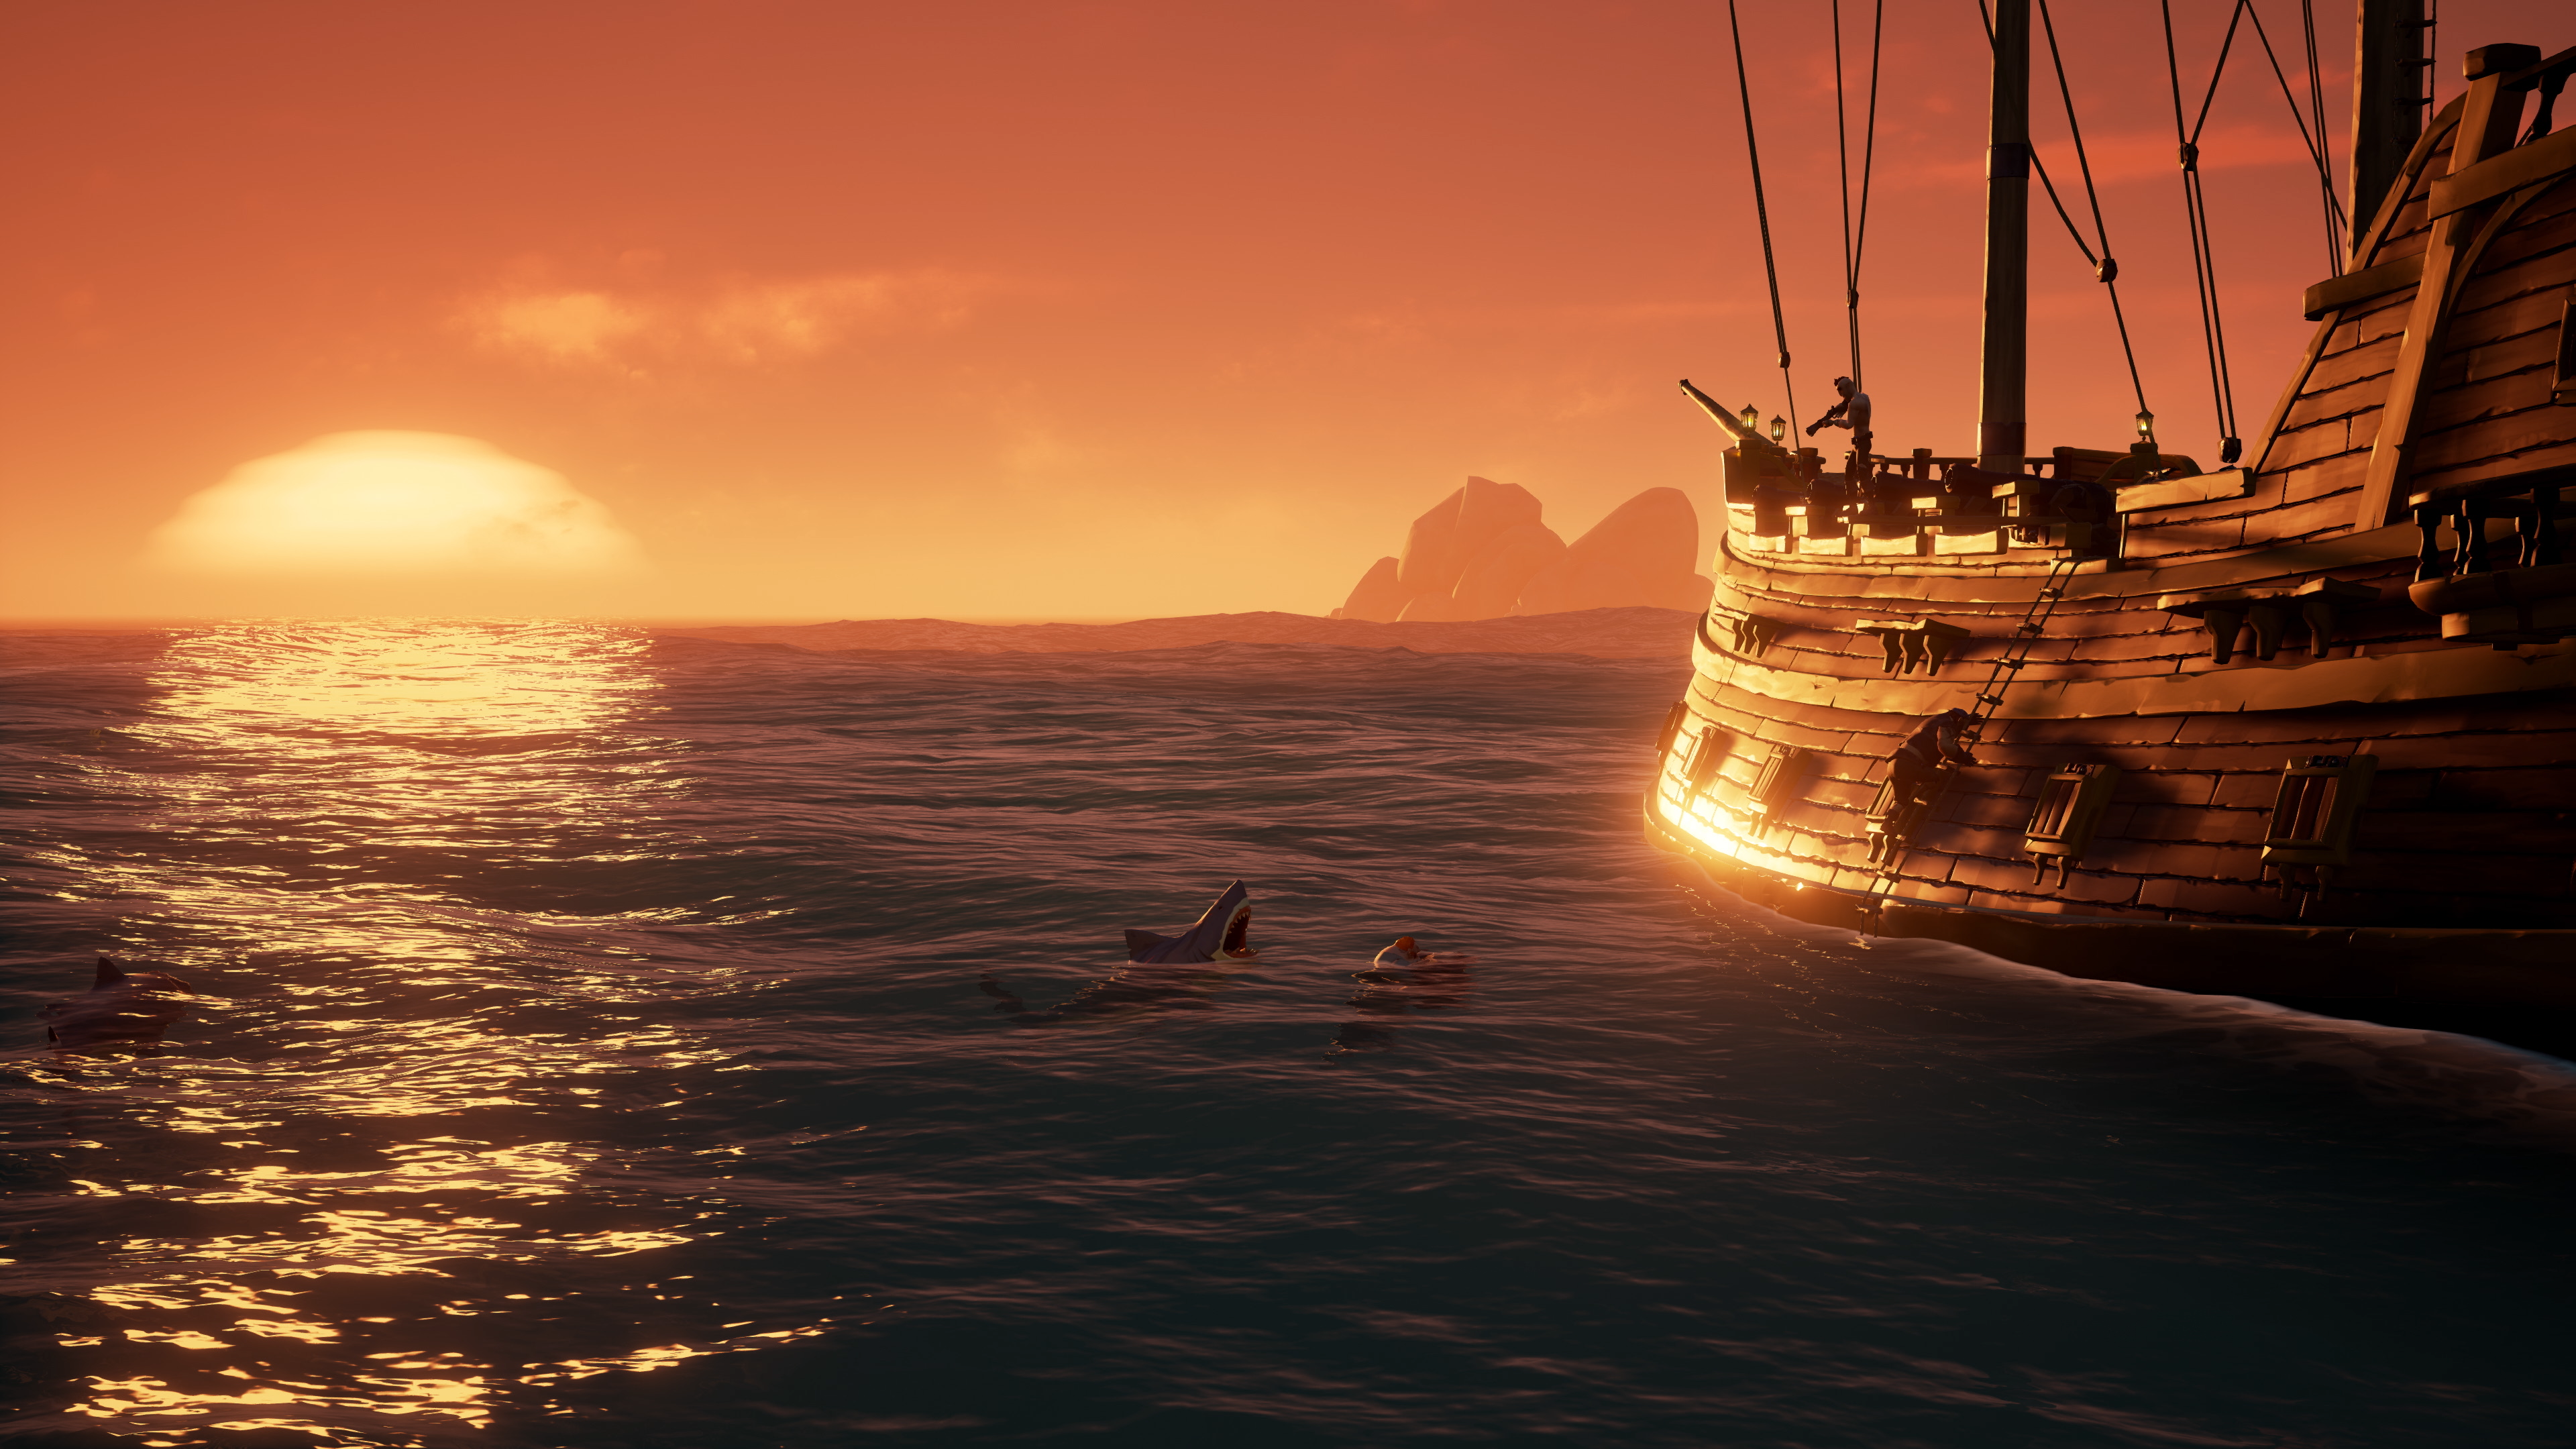 Sea of Thieves Arrives March 20, Pre-orders Available Now - Xbox Wire